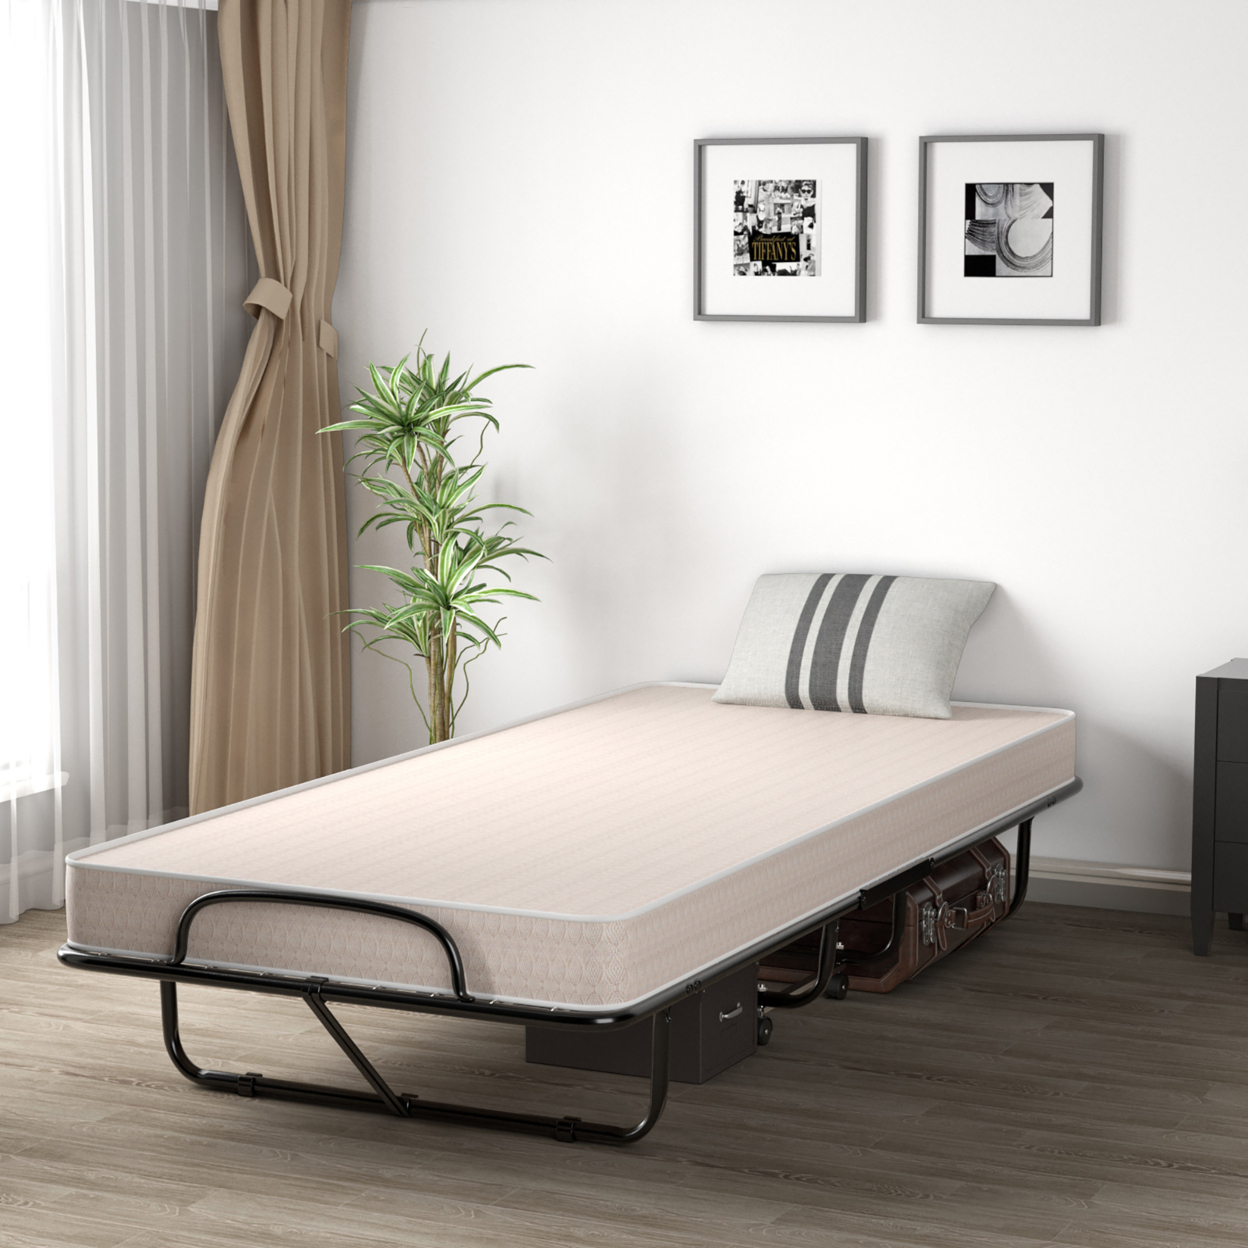 Folding Bed With Mattress Portable Rollaway Guest Cot Memory Foam Made In Italy Beige